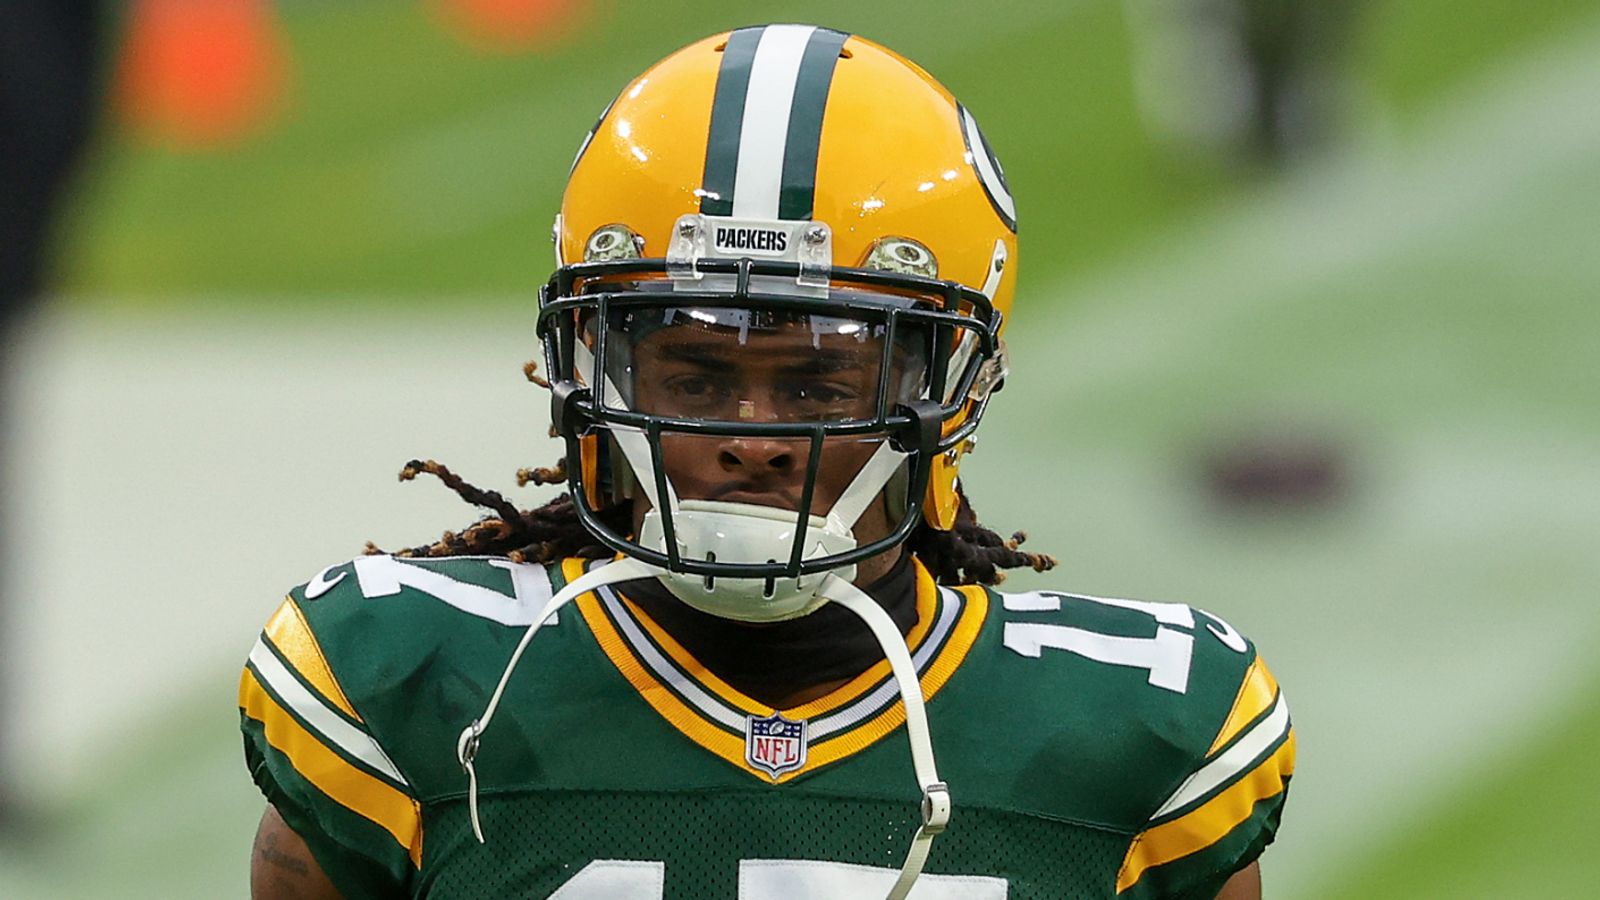 Davante Adams on Going Over the Middle for a Catch